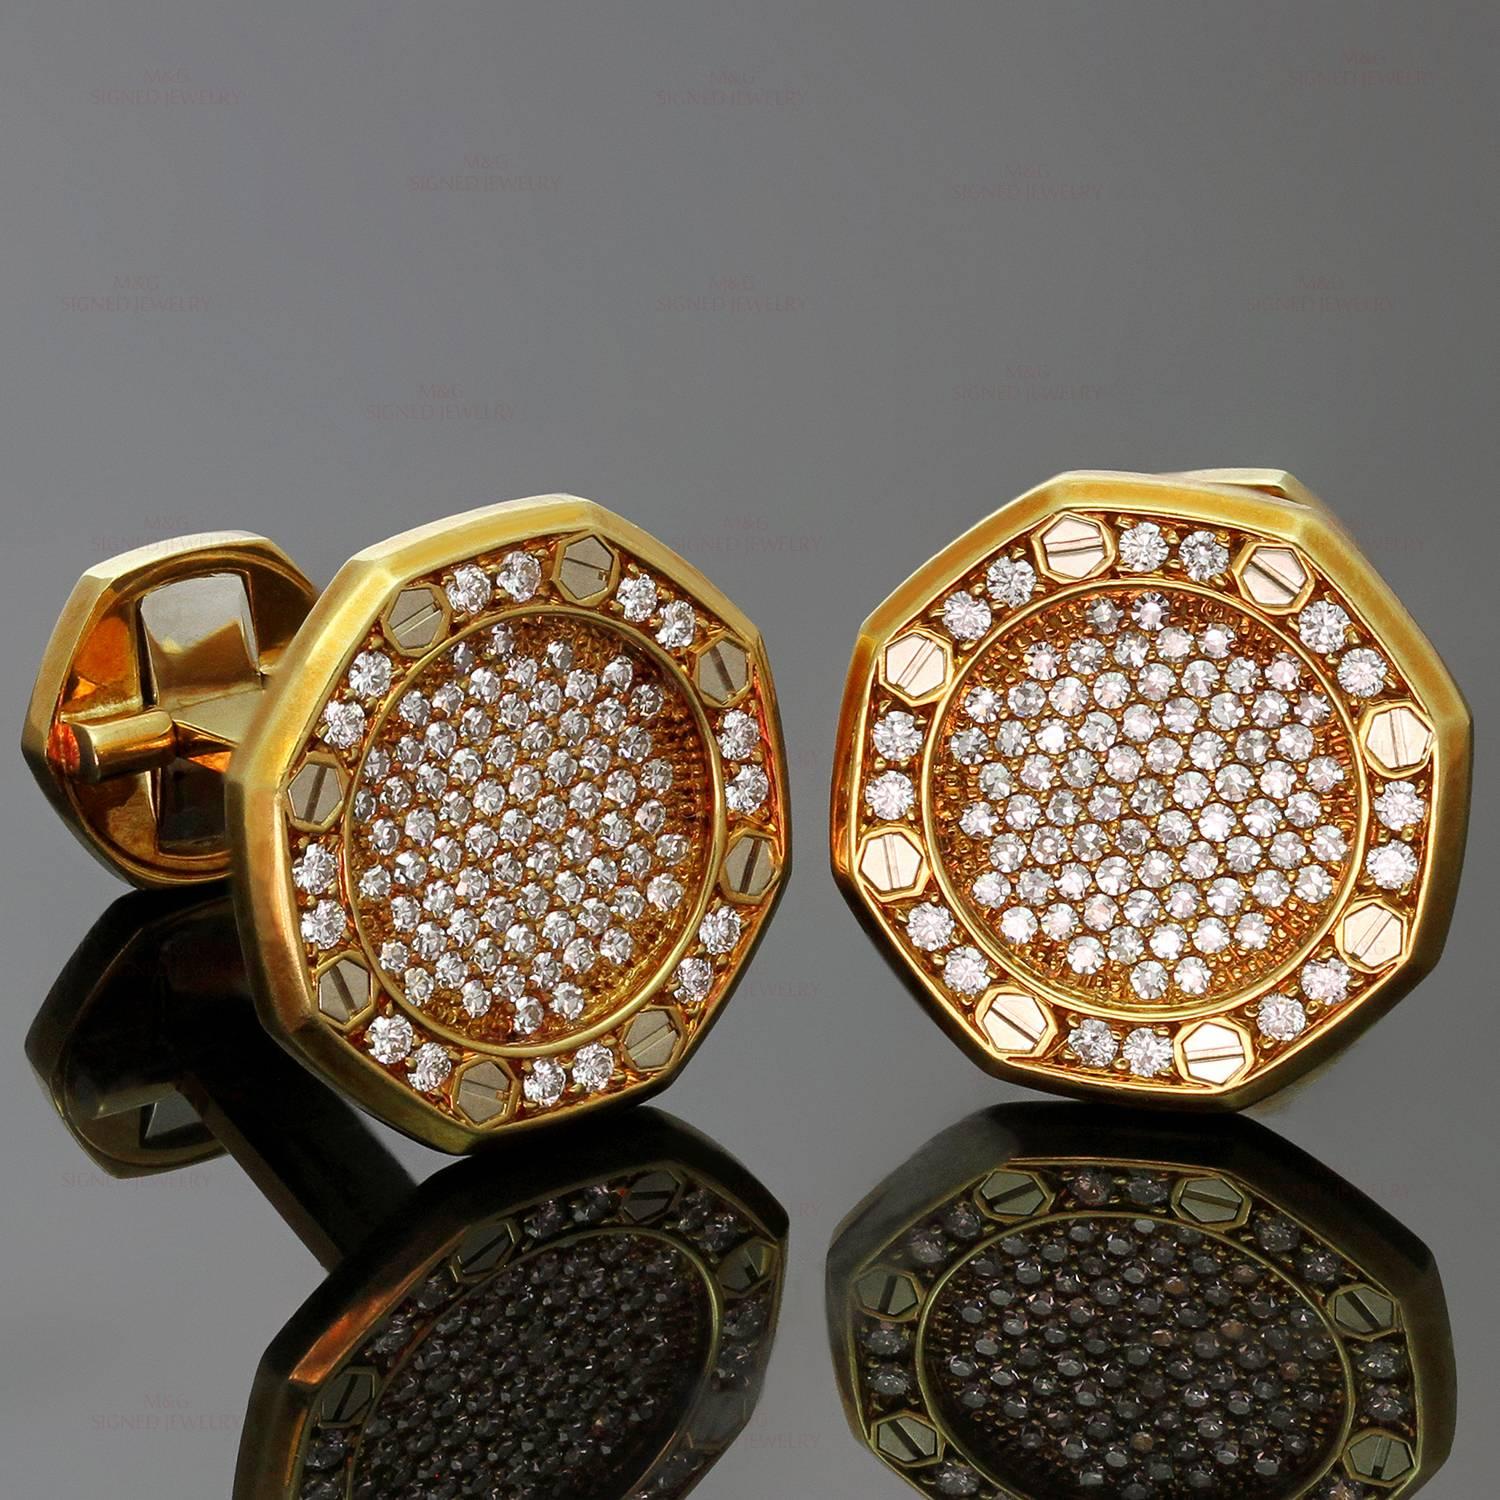 These exquisite cufflinks by Audemars Piguet feature a classic octogonal design crafted in 18k yellow gold and set with brilliant-cut round diamonds. Made in Switzerland circa 2000s. Measurements: 0.70" (18mm) width. 